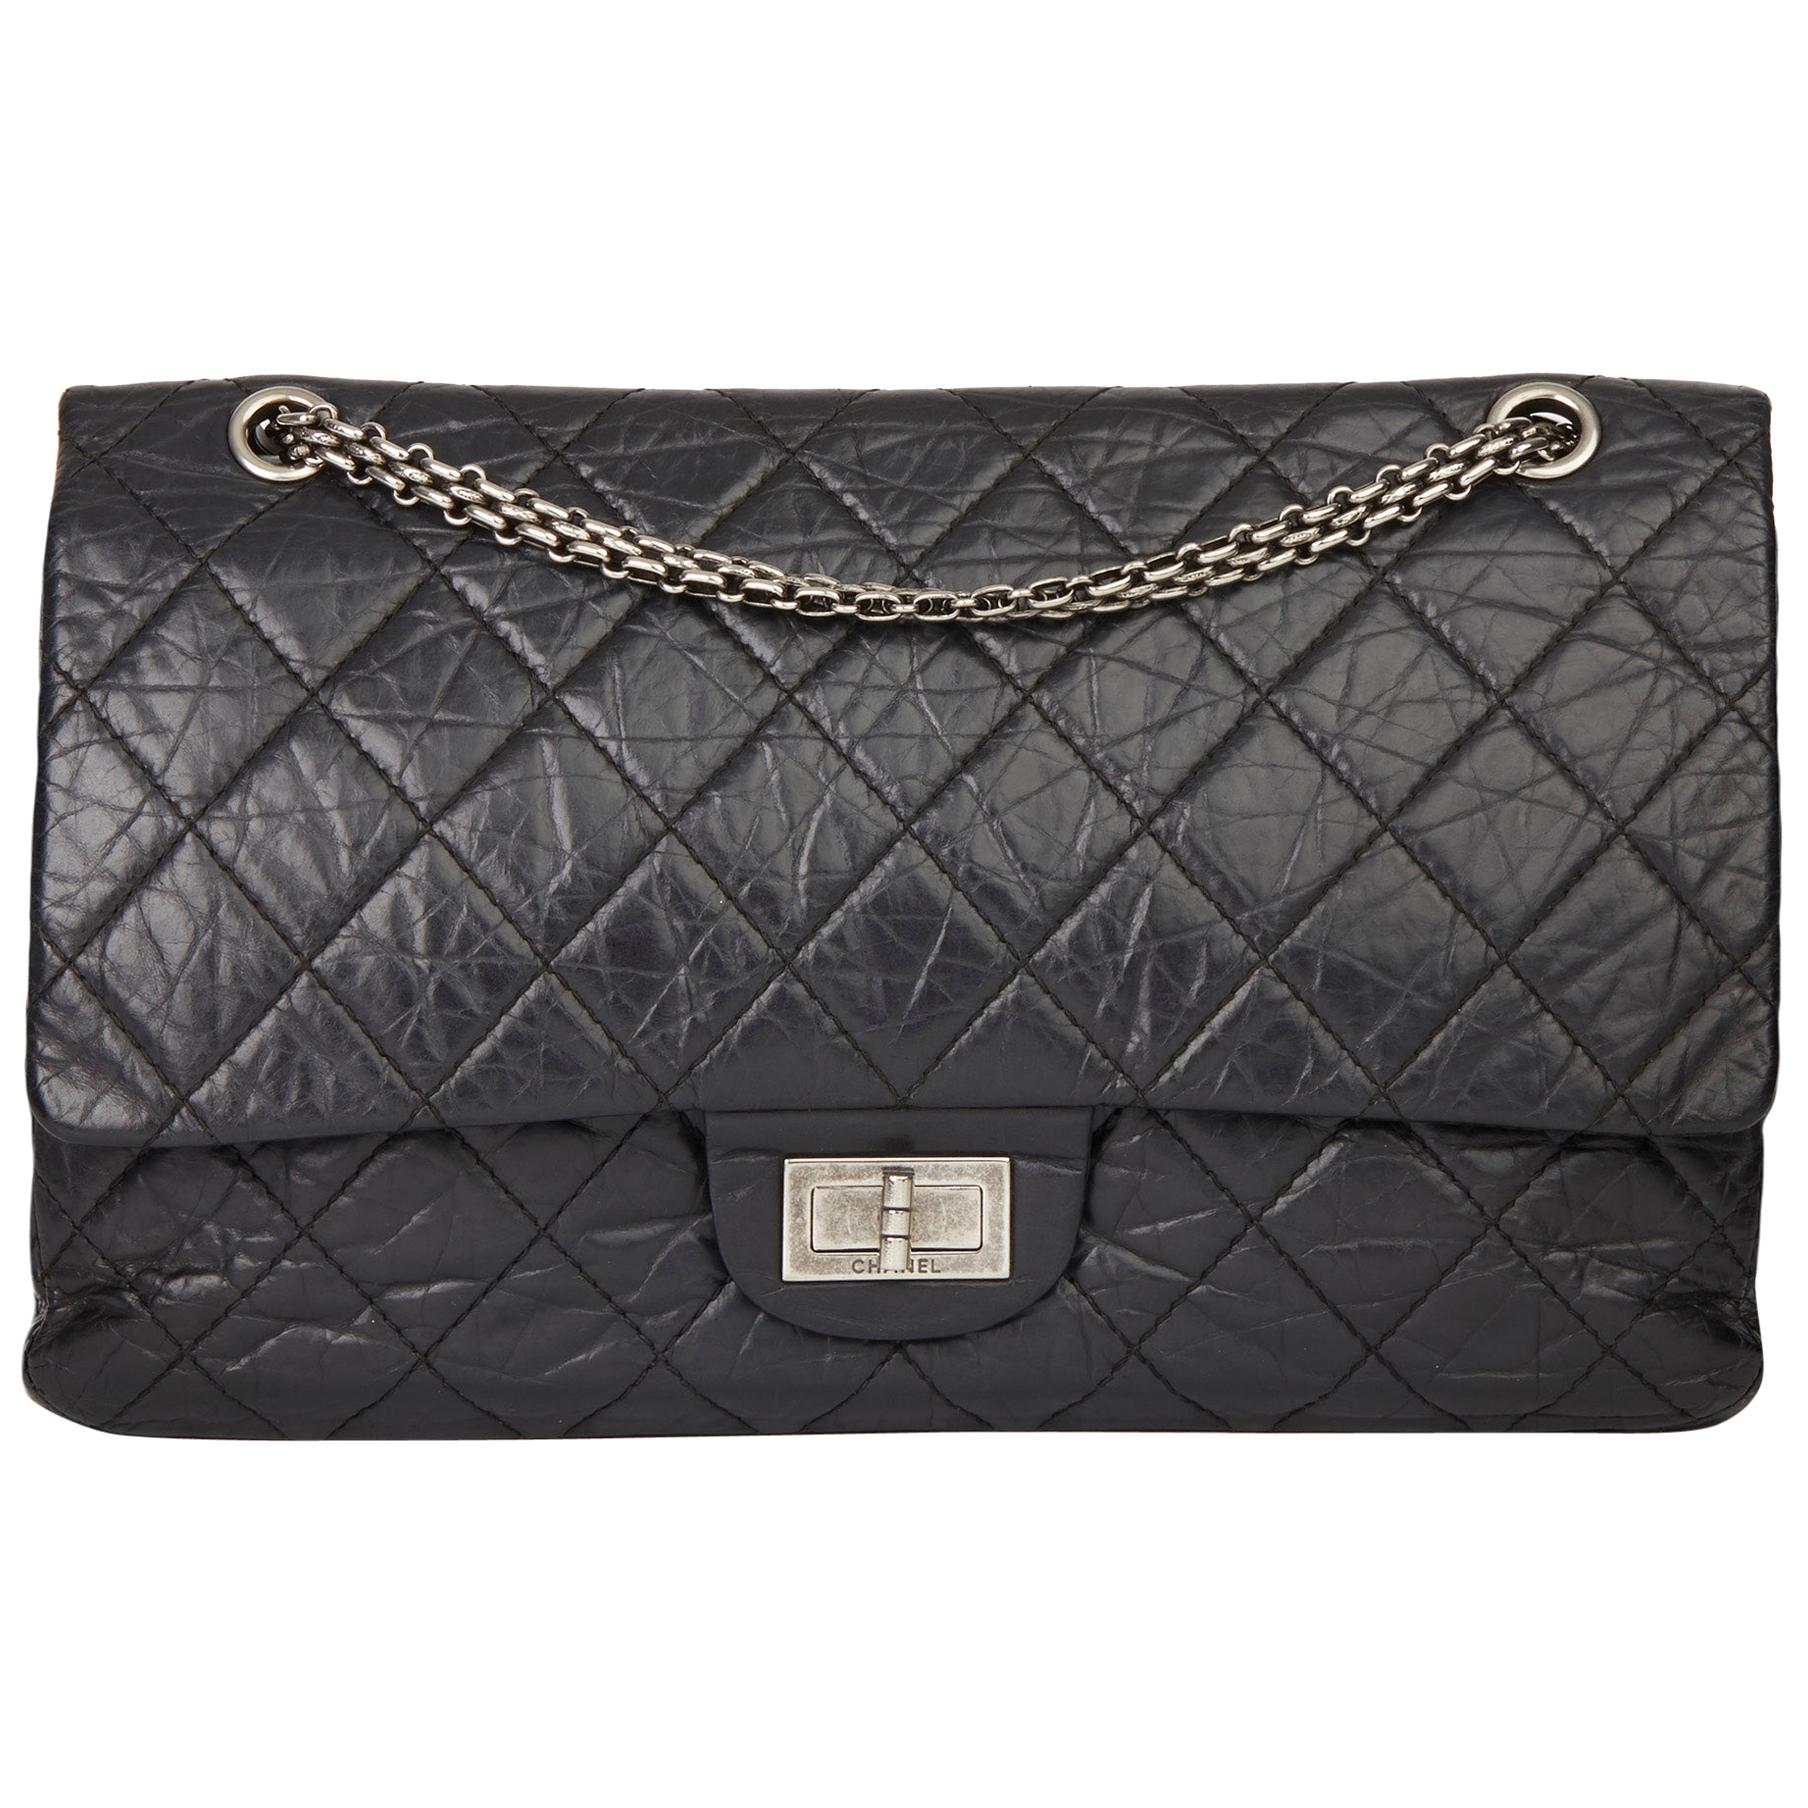 2008 Chanel Black Quilted Aged Calfskin Leather 2.55 Reissue 227 Double Flap Bag